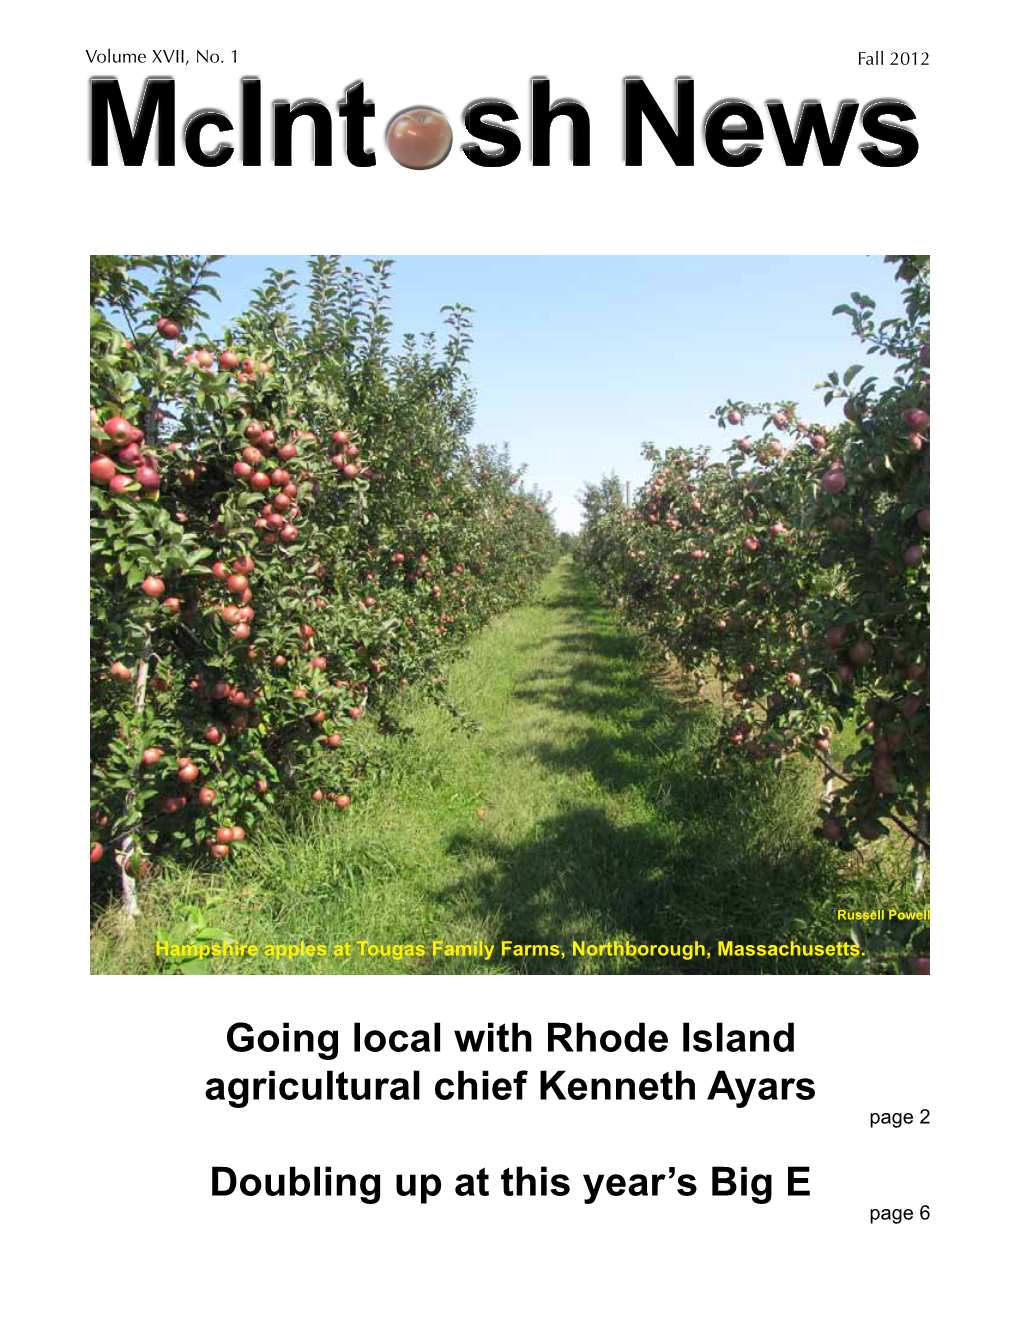 Going Local with Rhode Island Agricultural Chief Kenneth Ayars Page 2